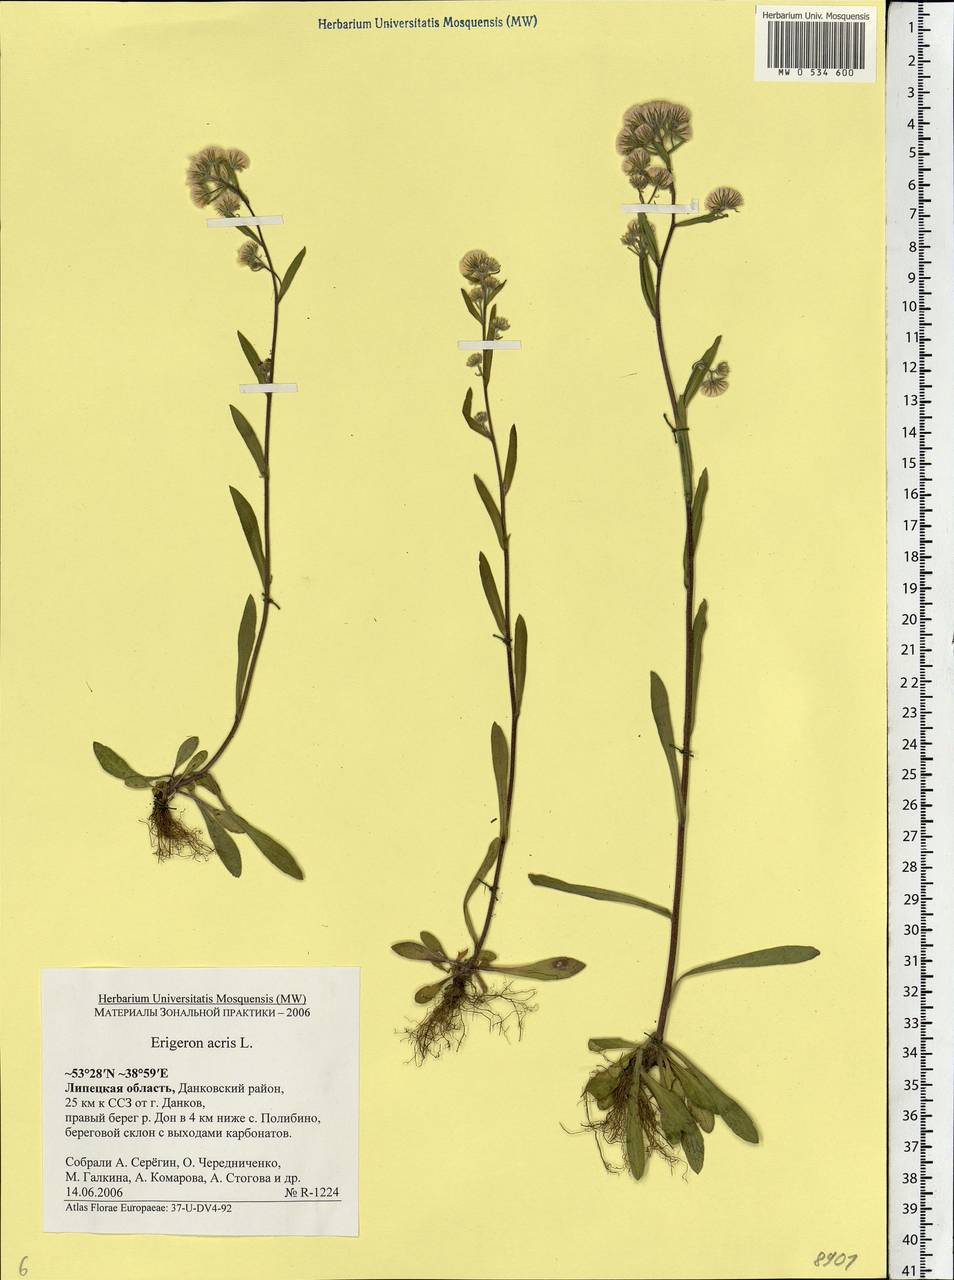 Erigeron acris L., Eastern Europe, Central forest-and-steppe region (E6) (Russia)